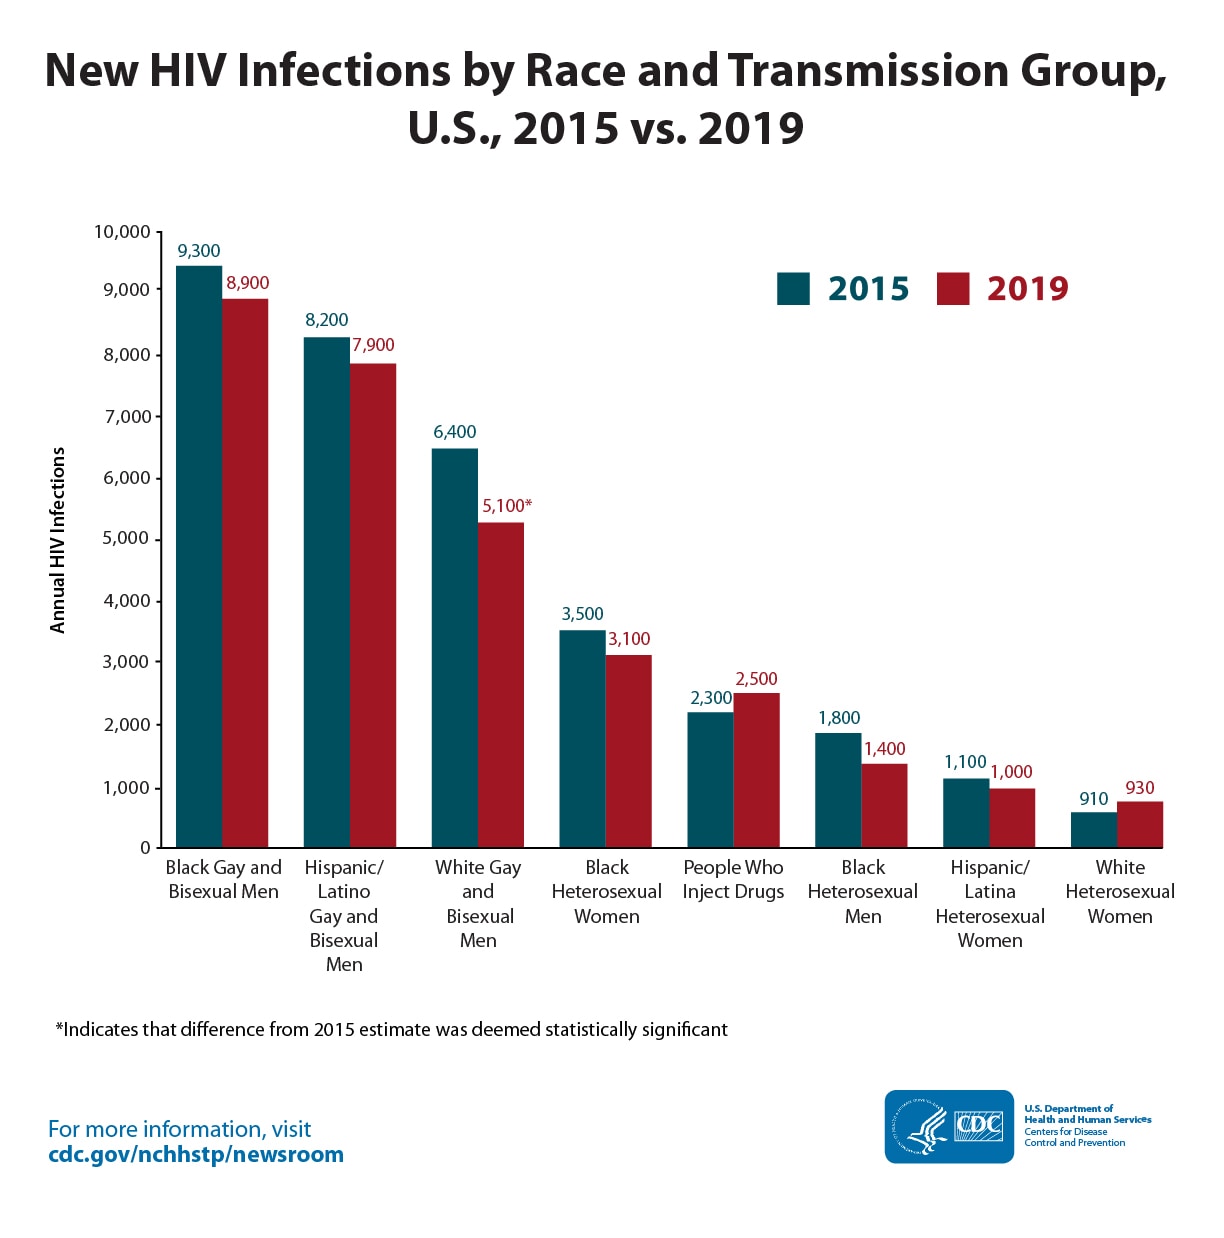 A bar graph showing the number of new HIV infections in 2015 vs. 2019 by race and transmission category.